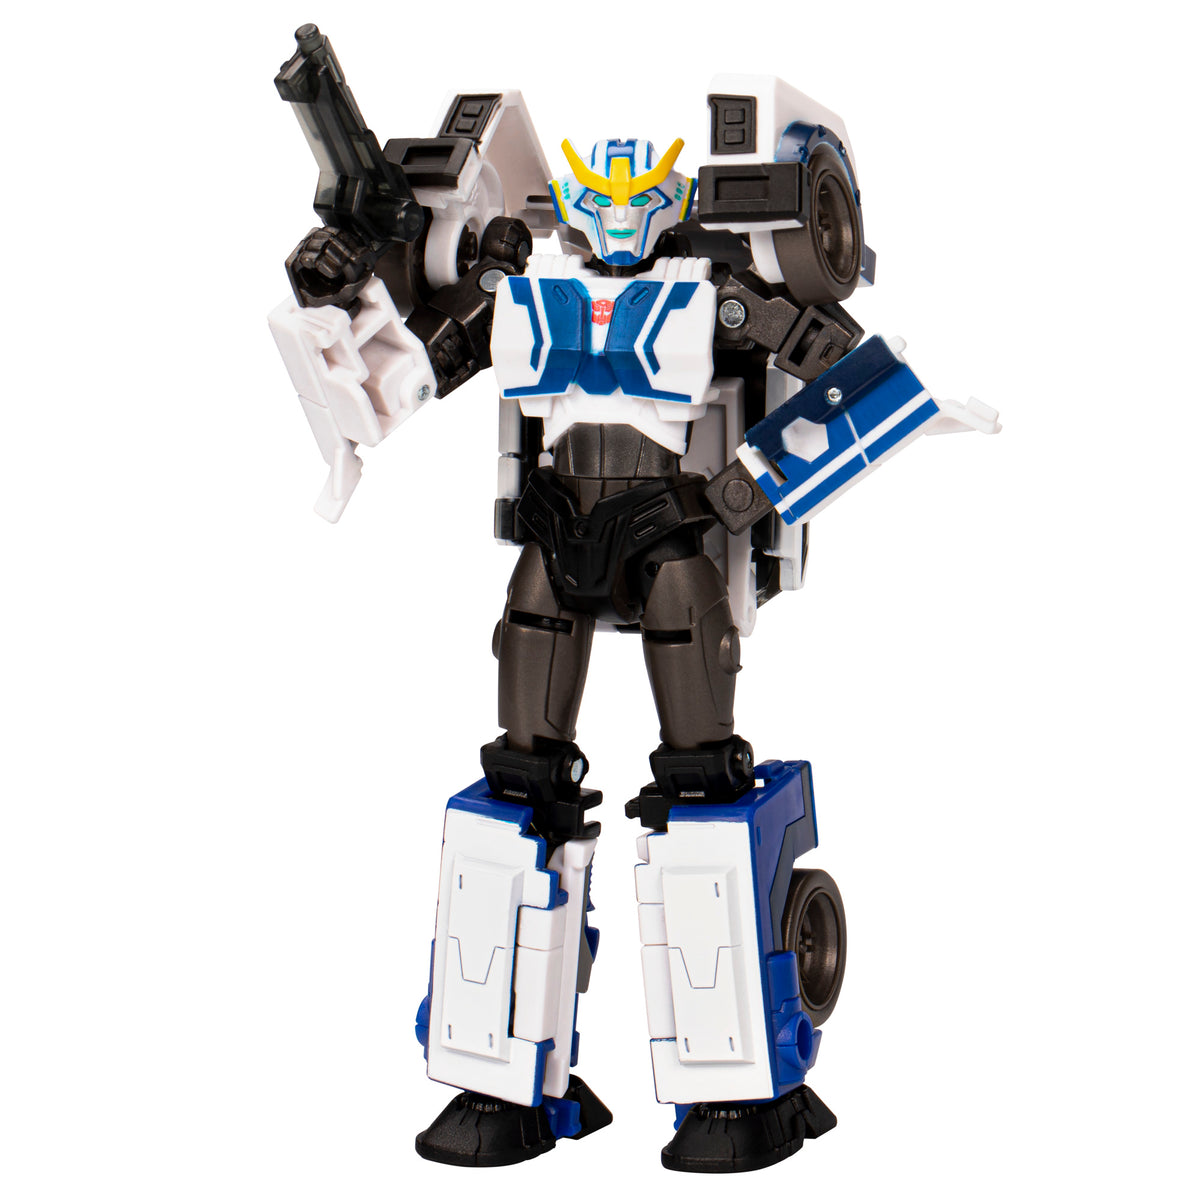 Transformers Deluxe Class in Disguise 2015 Uni – Hasbro Pulse